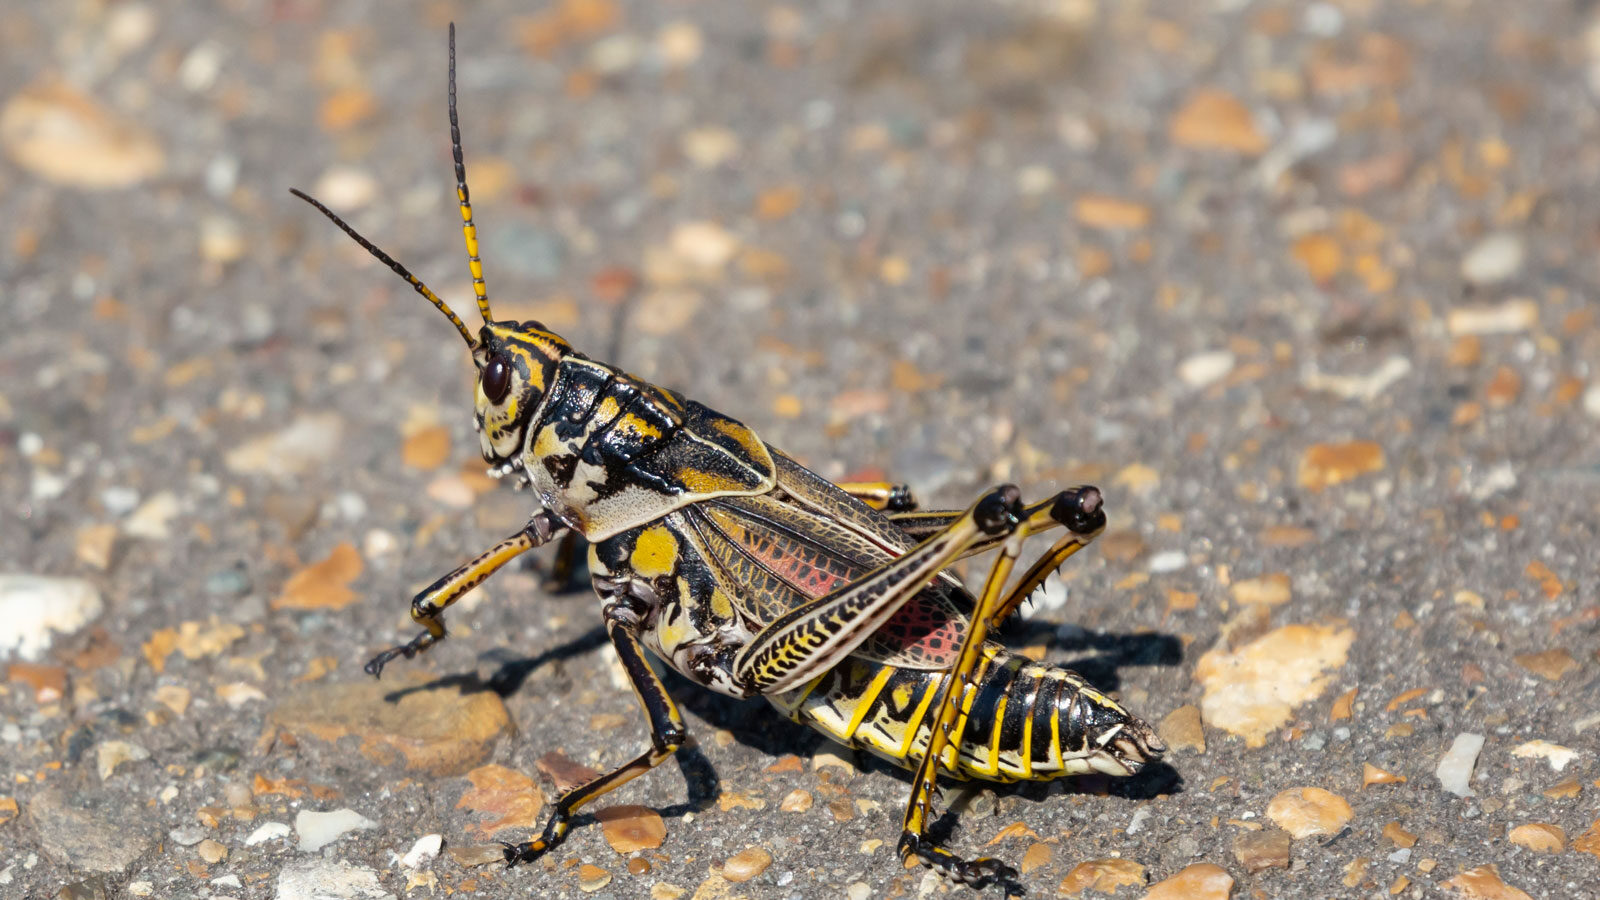 Adult eastern lubber grasshopper standing on concrete